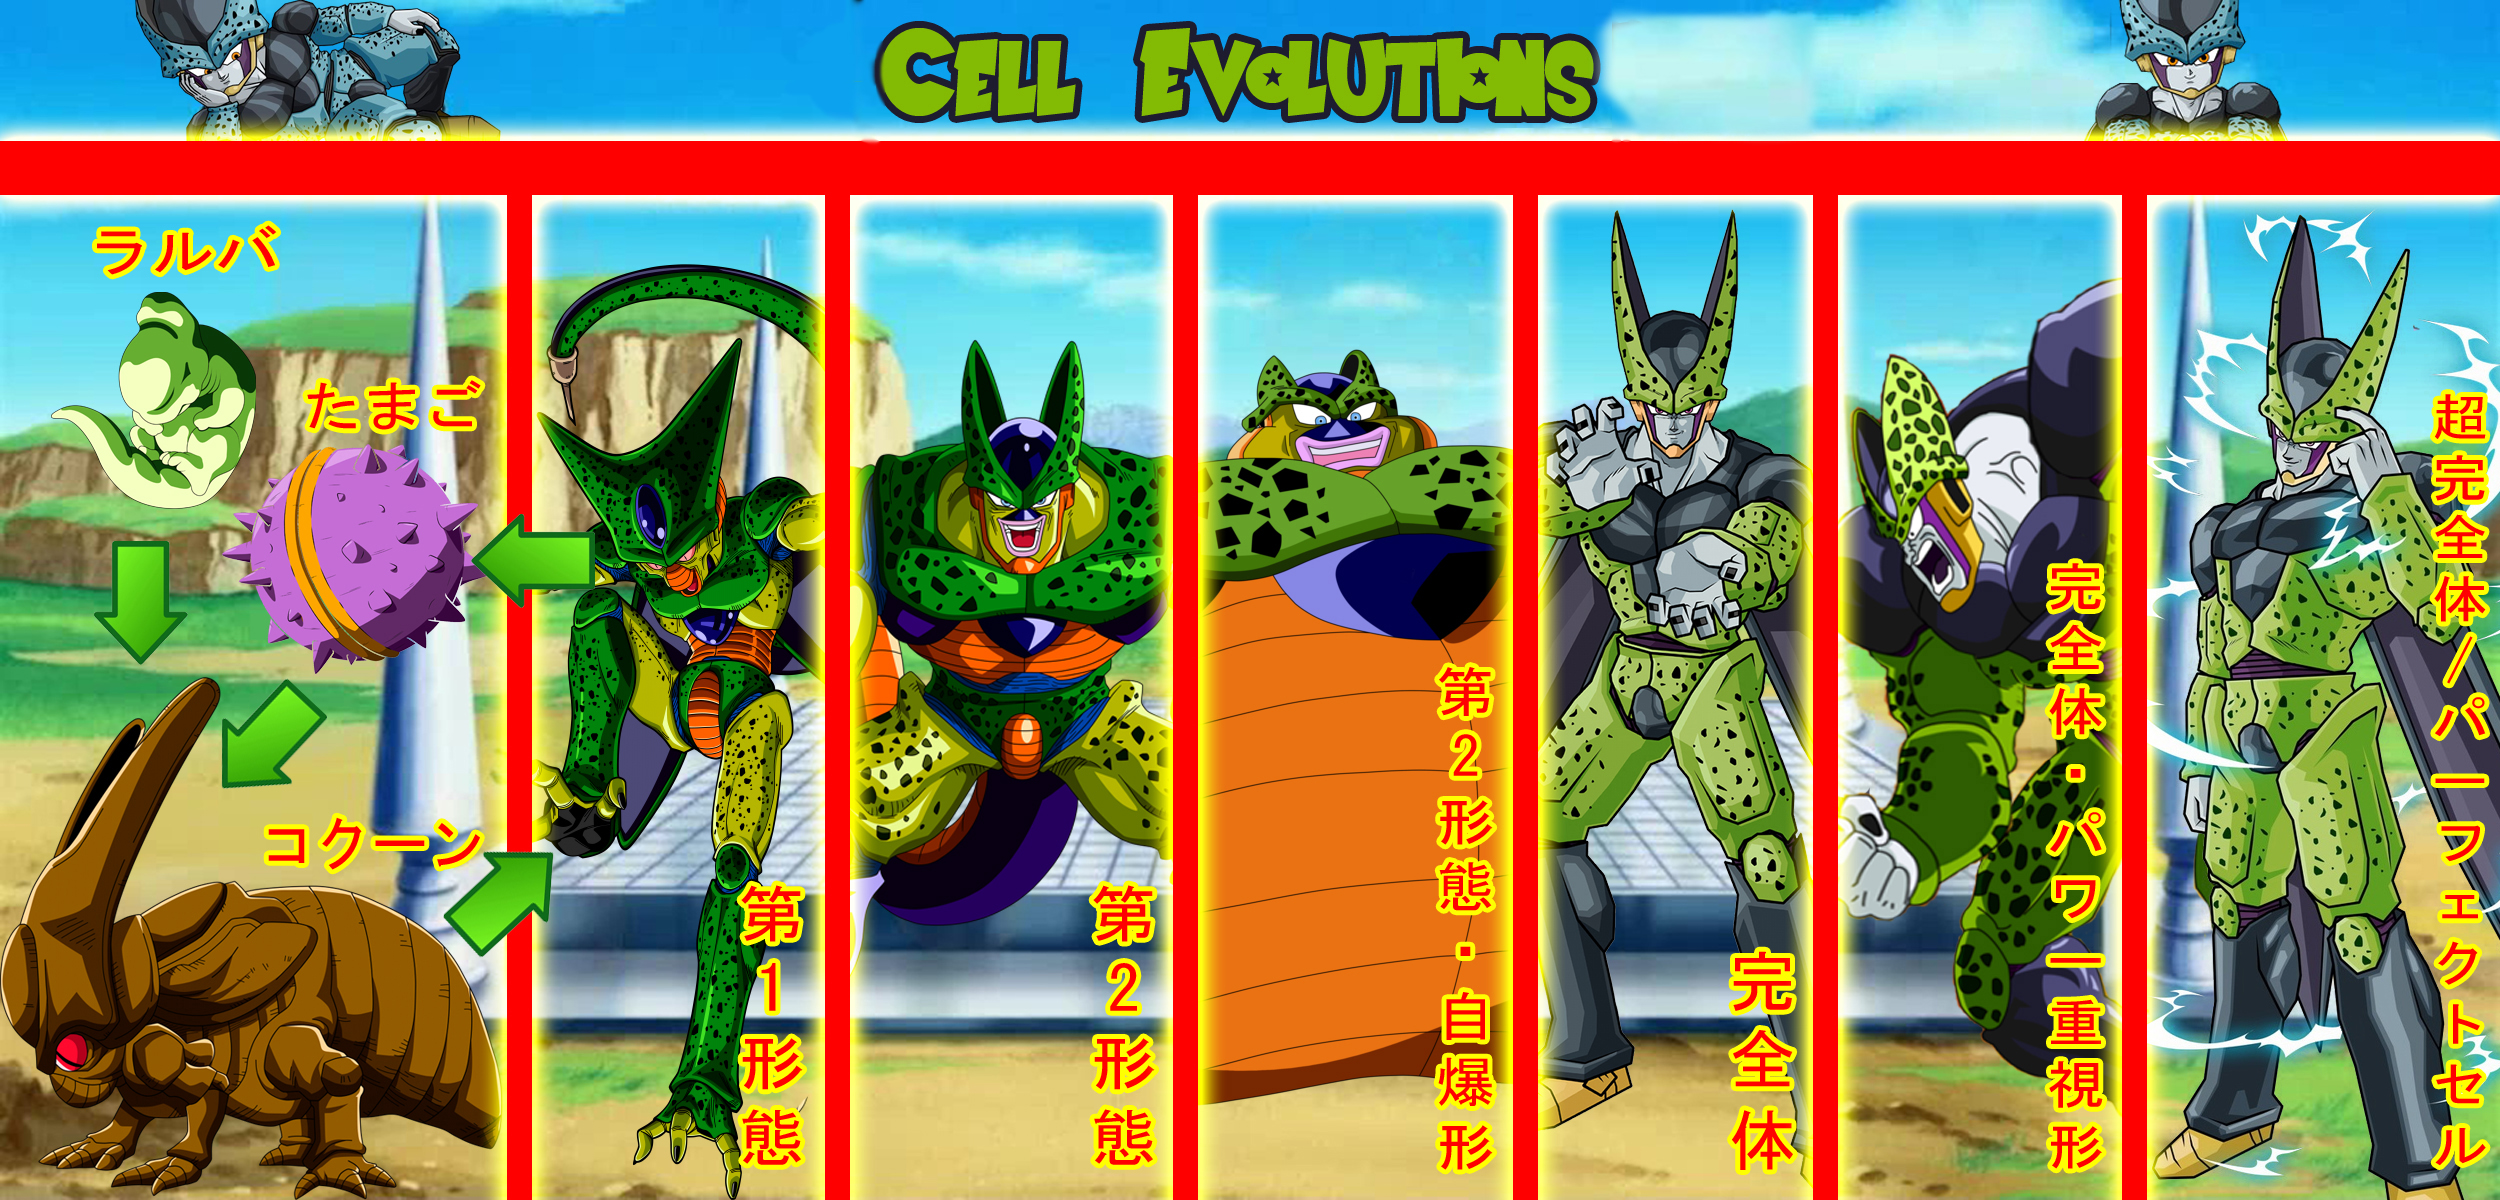 Cell Evolutions by Gonzalo Valenzuela